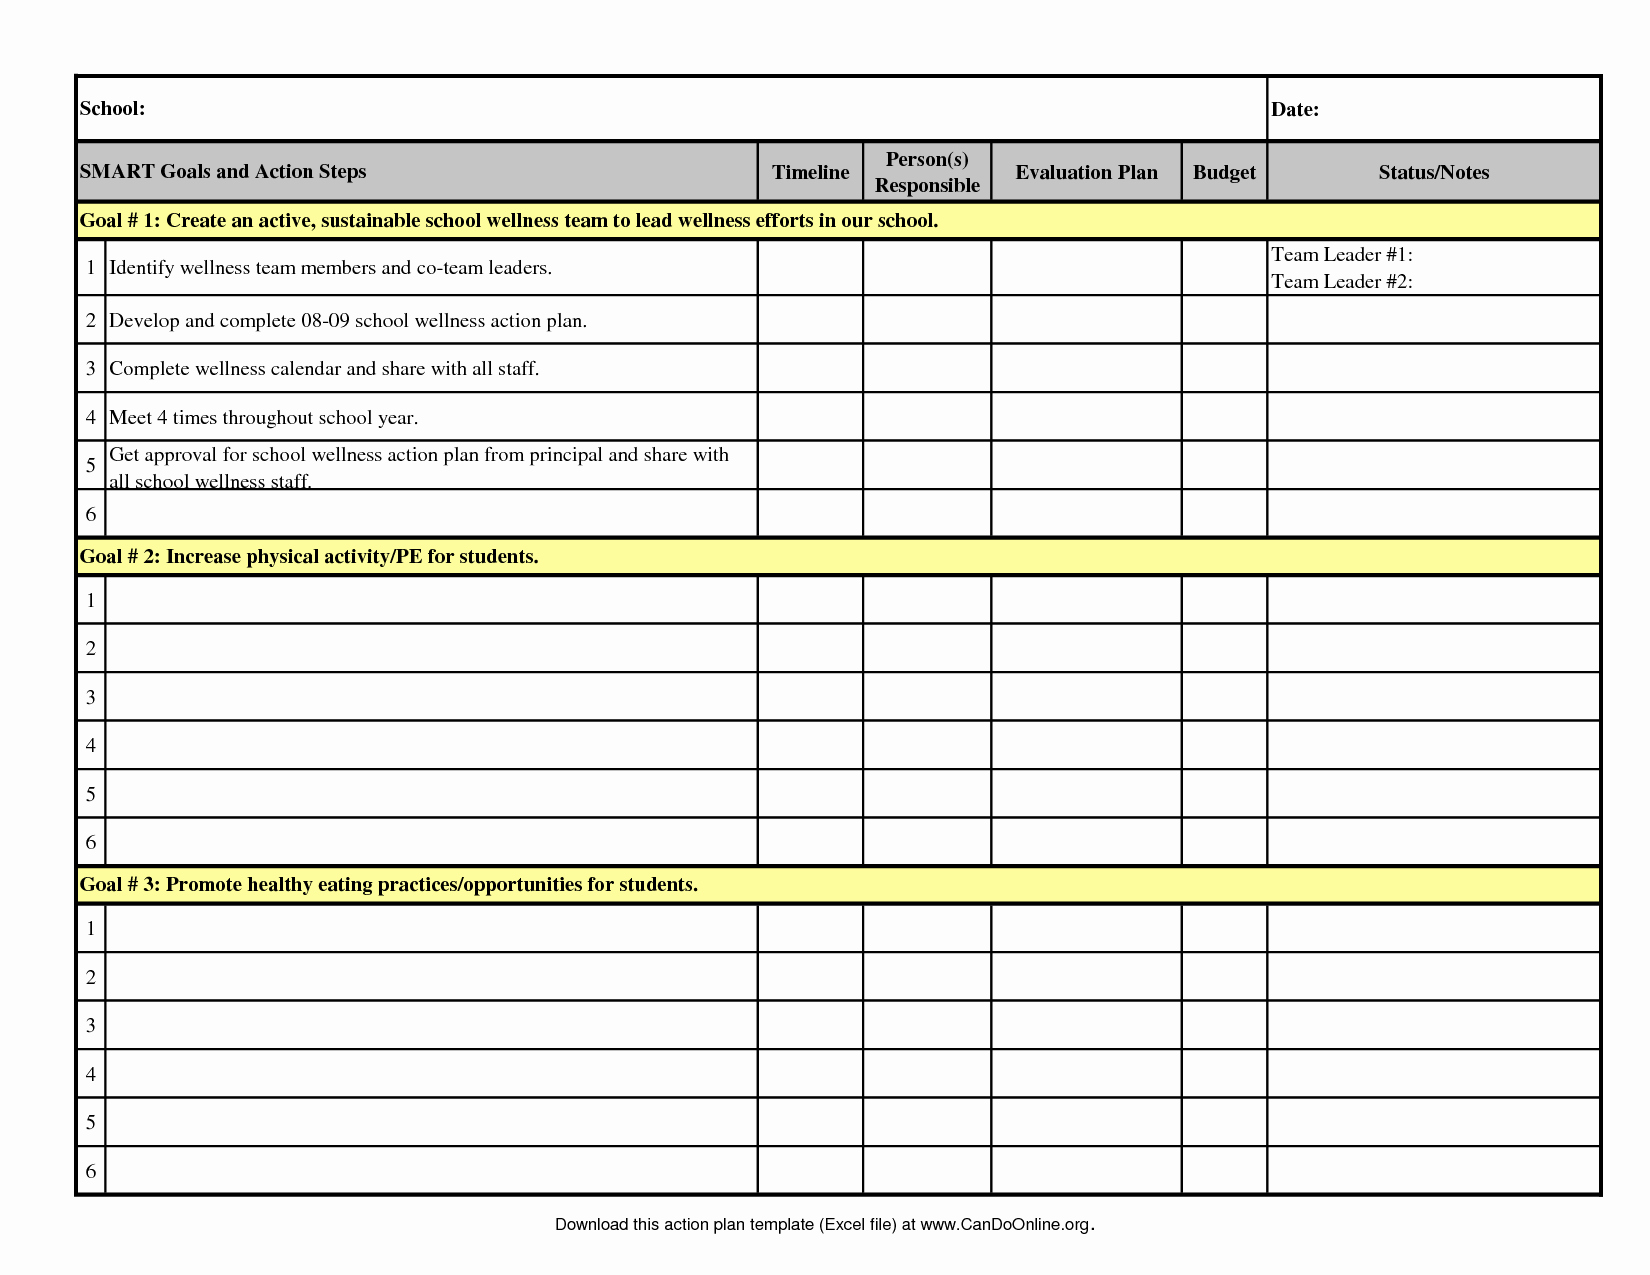 Smart Action Plans Template Awesome Action Plan Template 2008 09 Excel Cadqgtfa